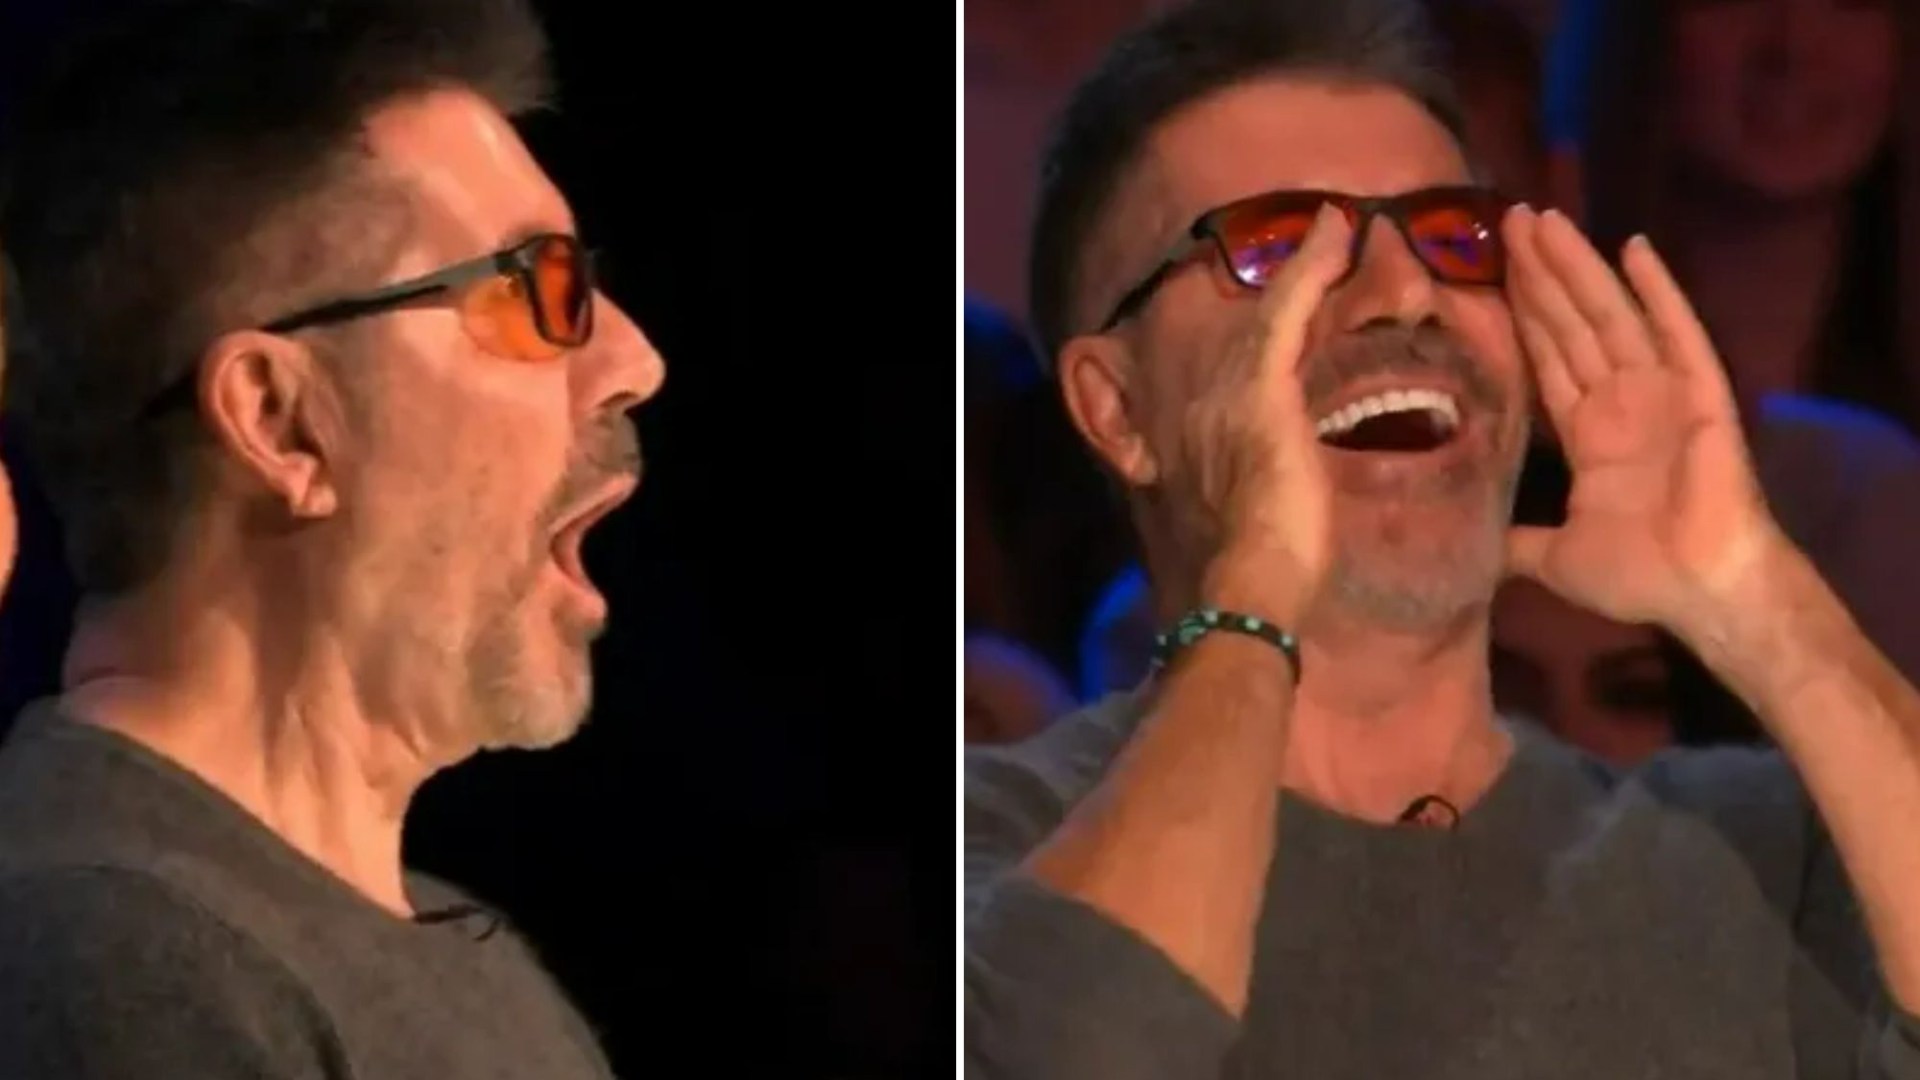 Watch as Simon Cowell is left open-mouthed in shock as familiar faces audition for Britain’s Got Talent